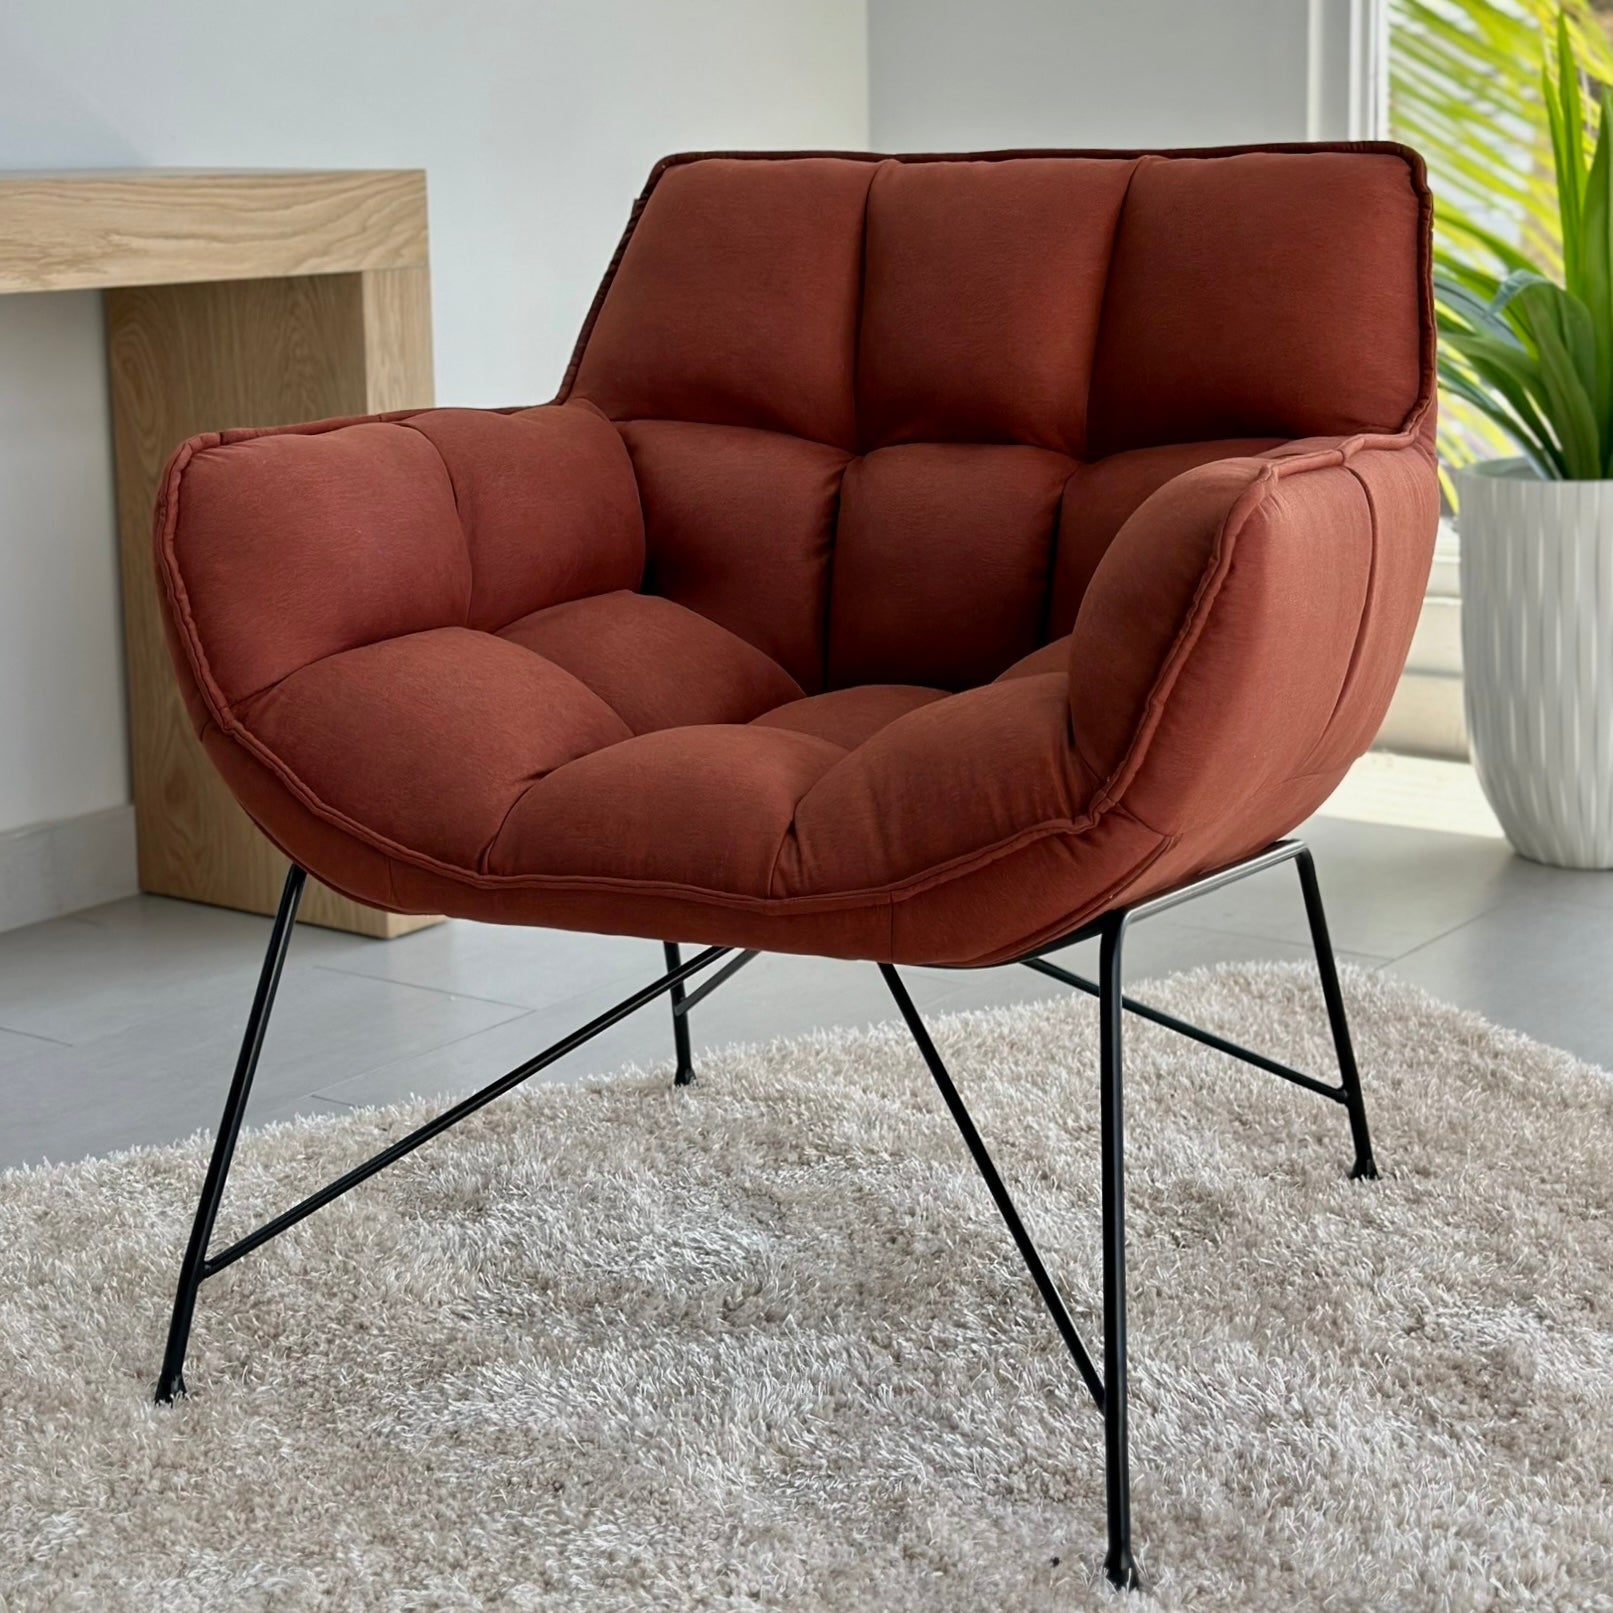 Tufted  Terracotta Accent Chair